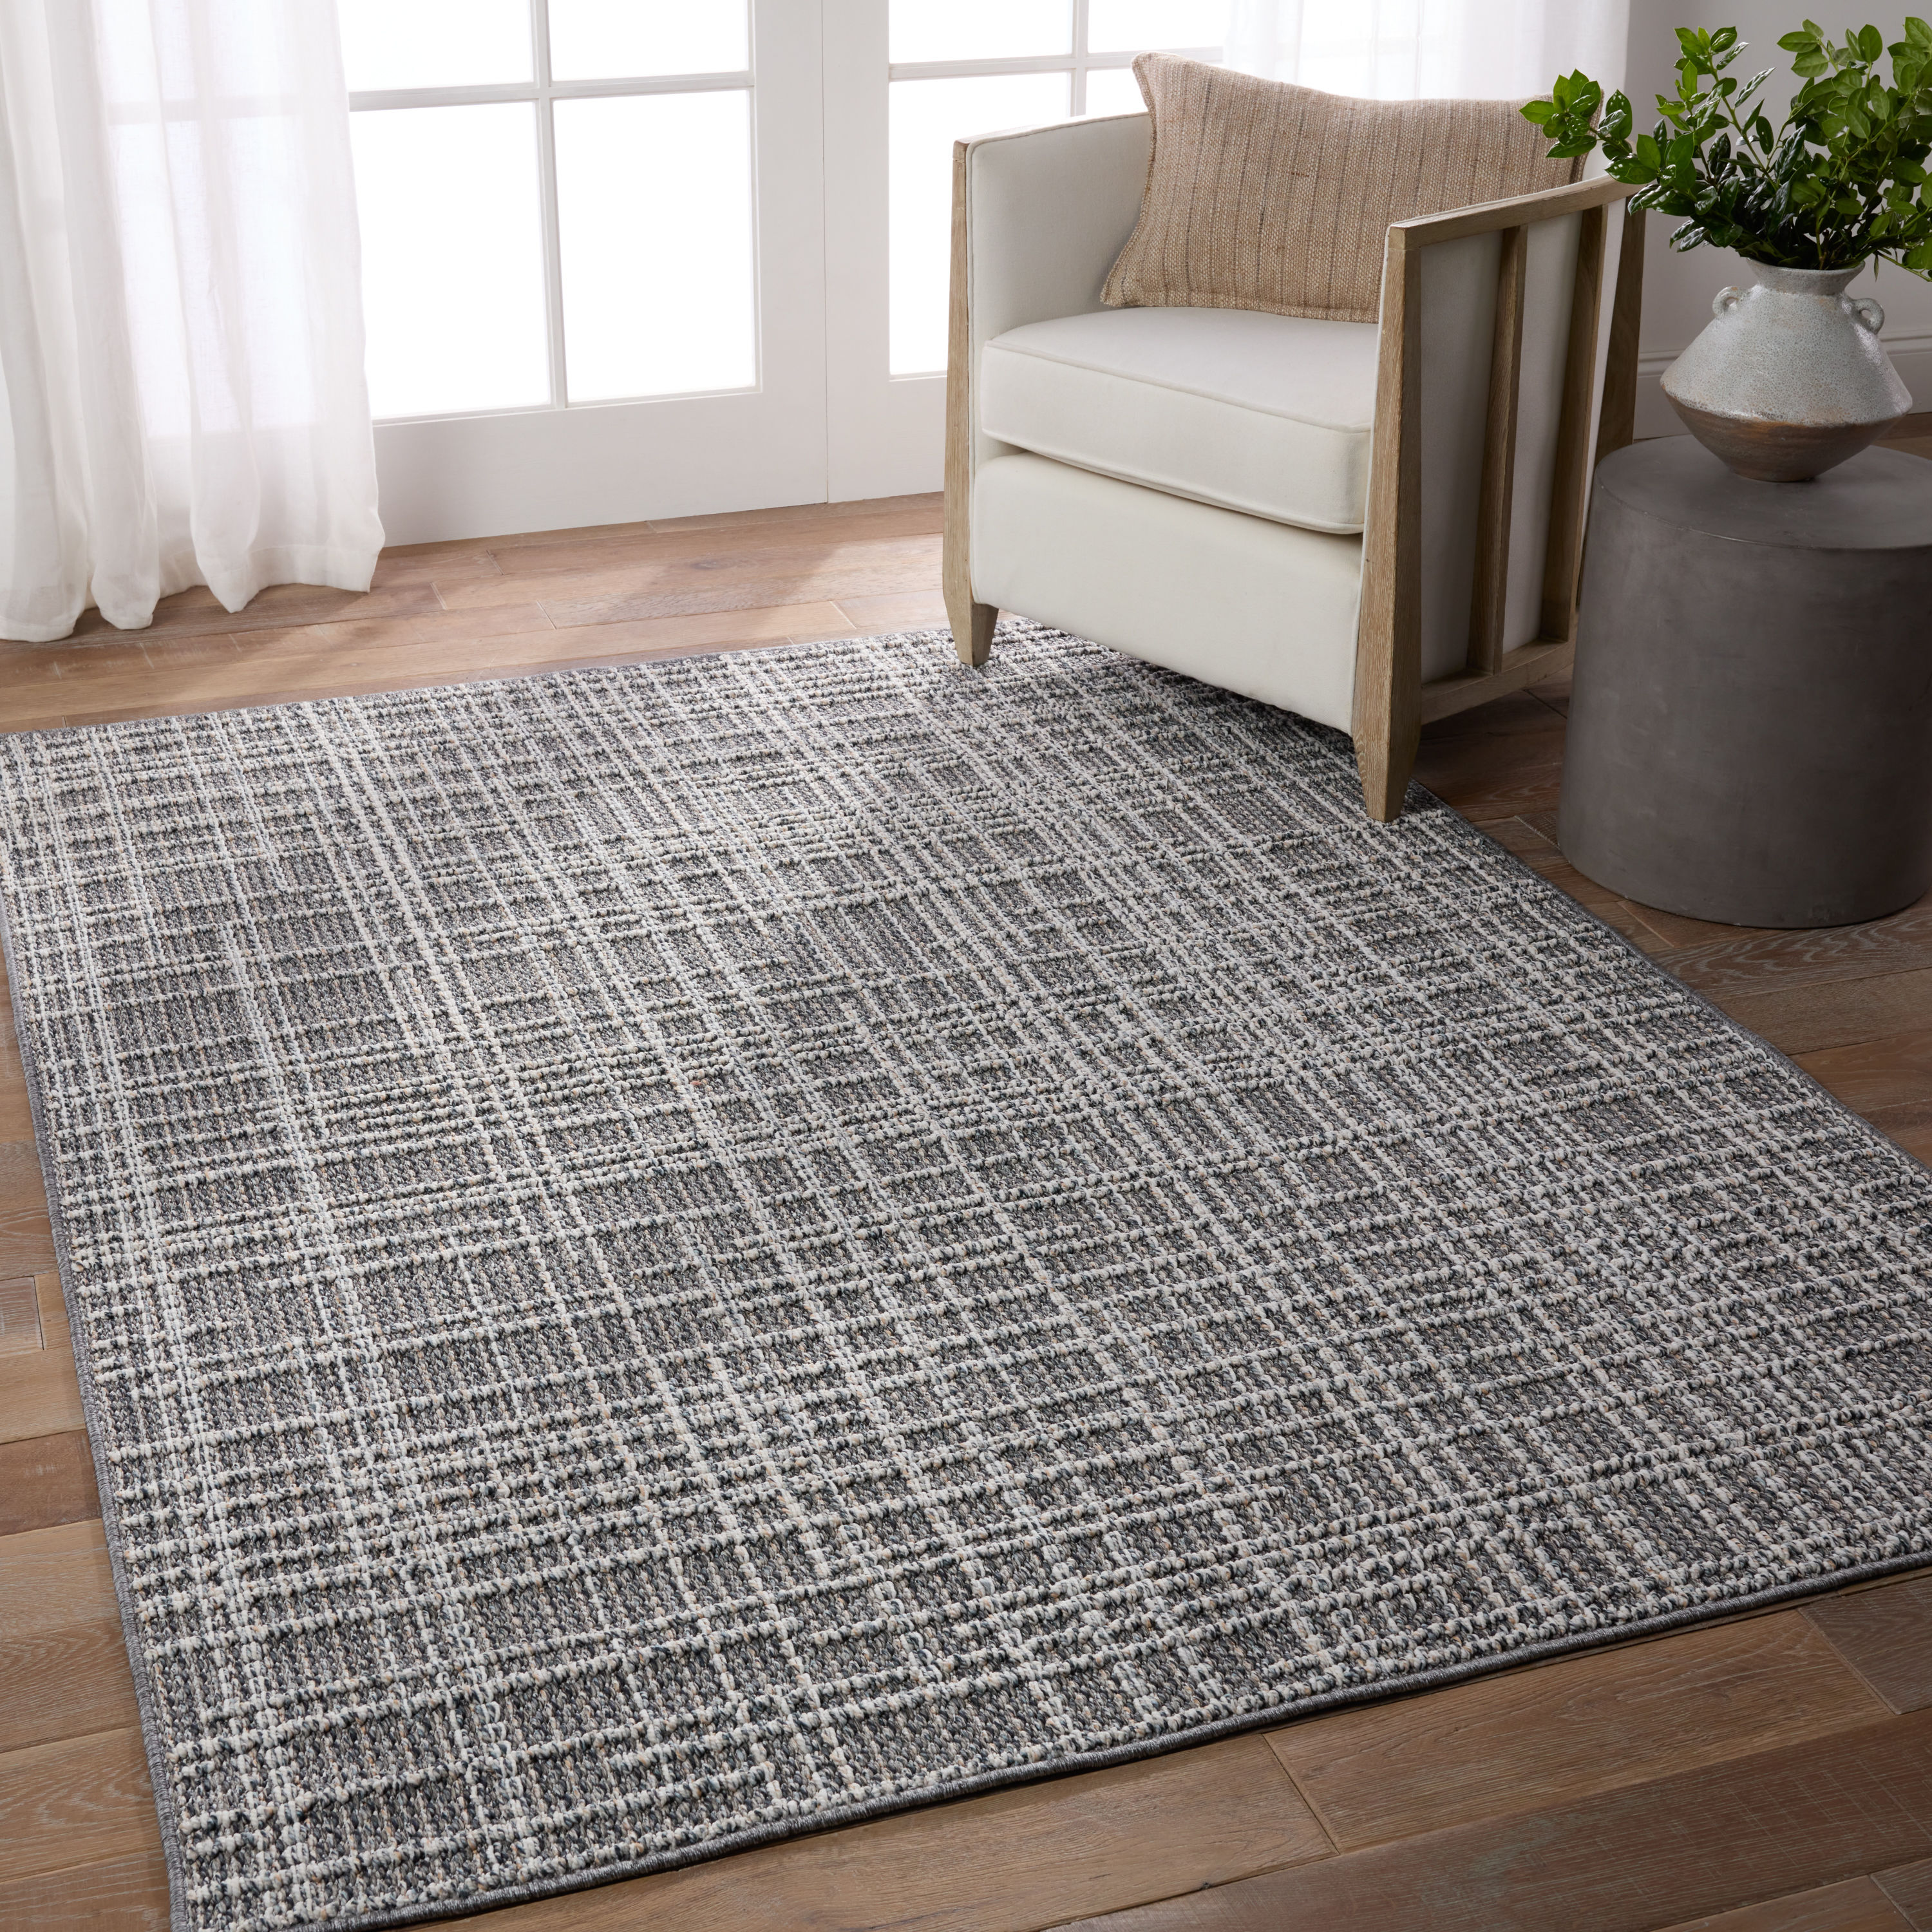 Breezsisan Gray and White Striped Outdoor Front Door Rug 3'x5' Under  Doormats Rug, Hand-Woven Washable Cotton Indoor Rugs for Front Porch,  Patio, Entryway, Farm…